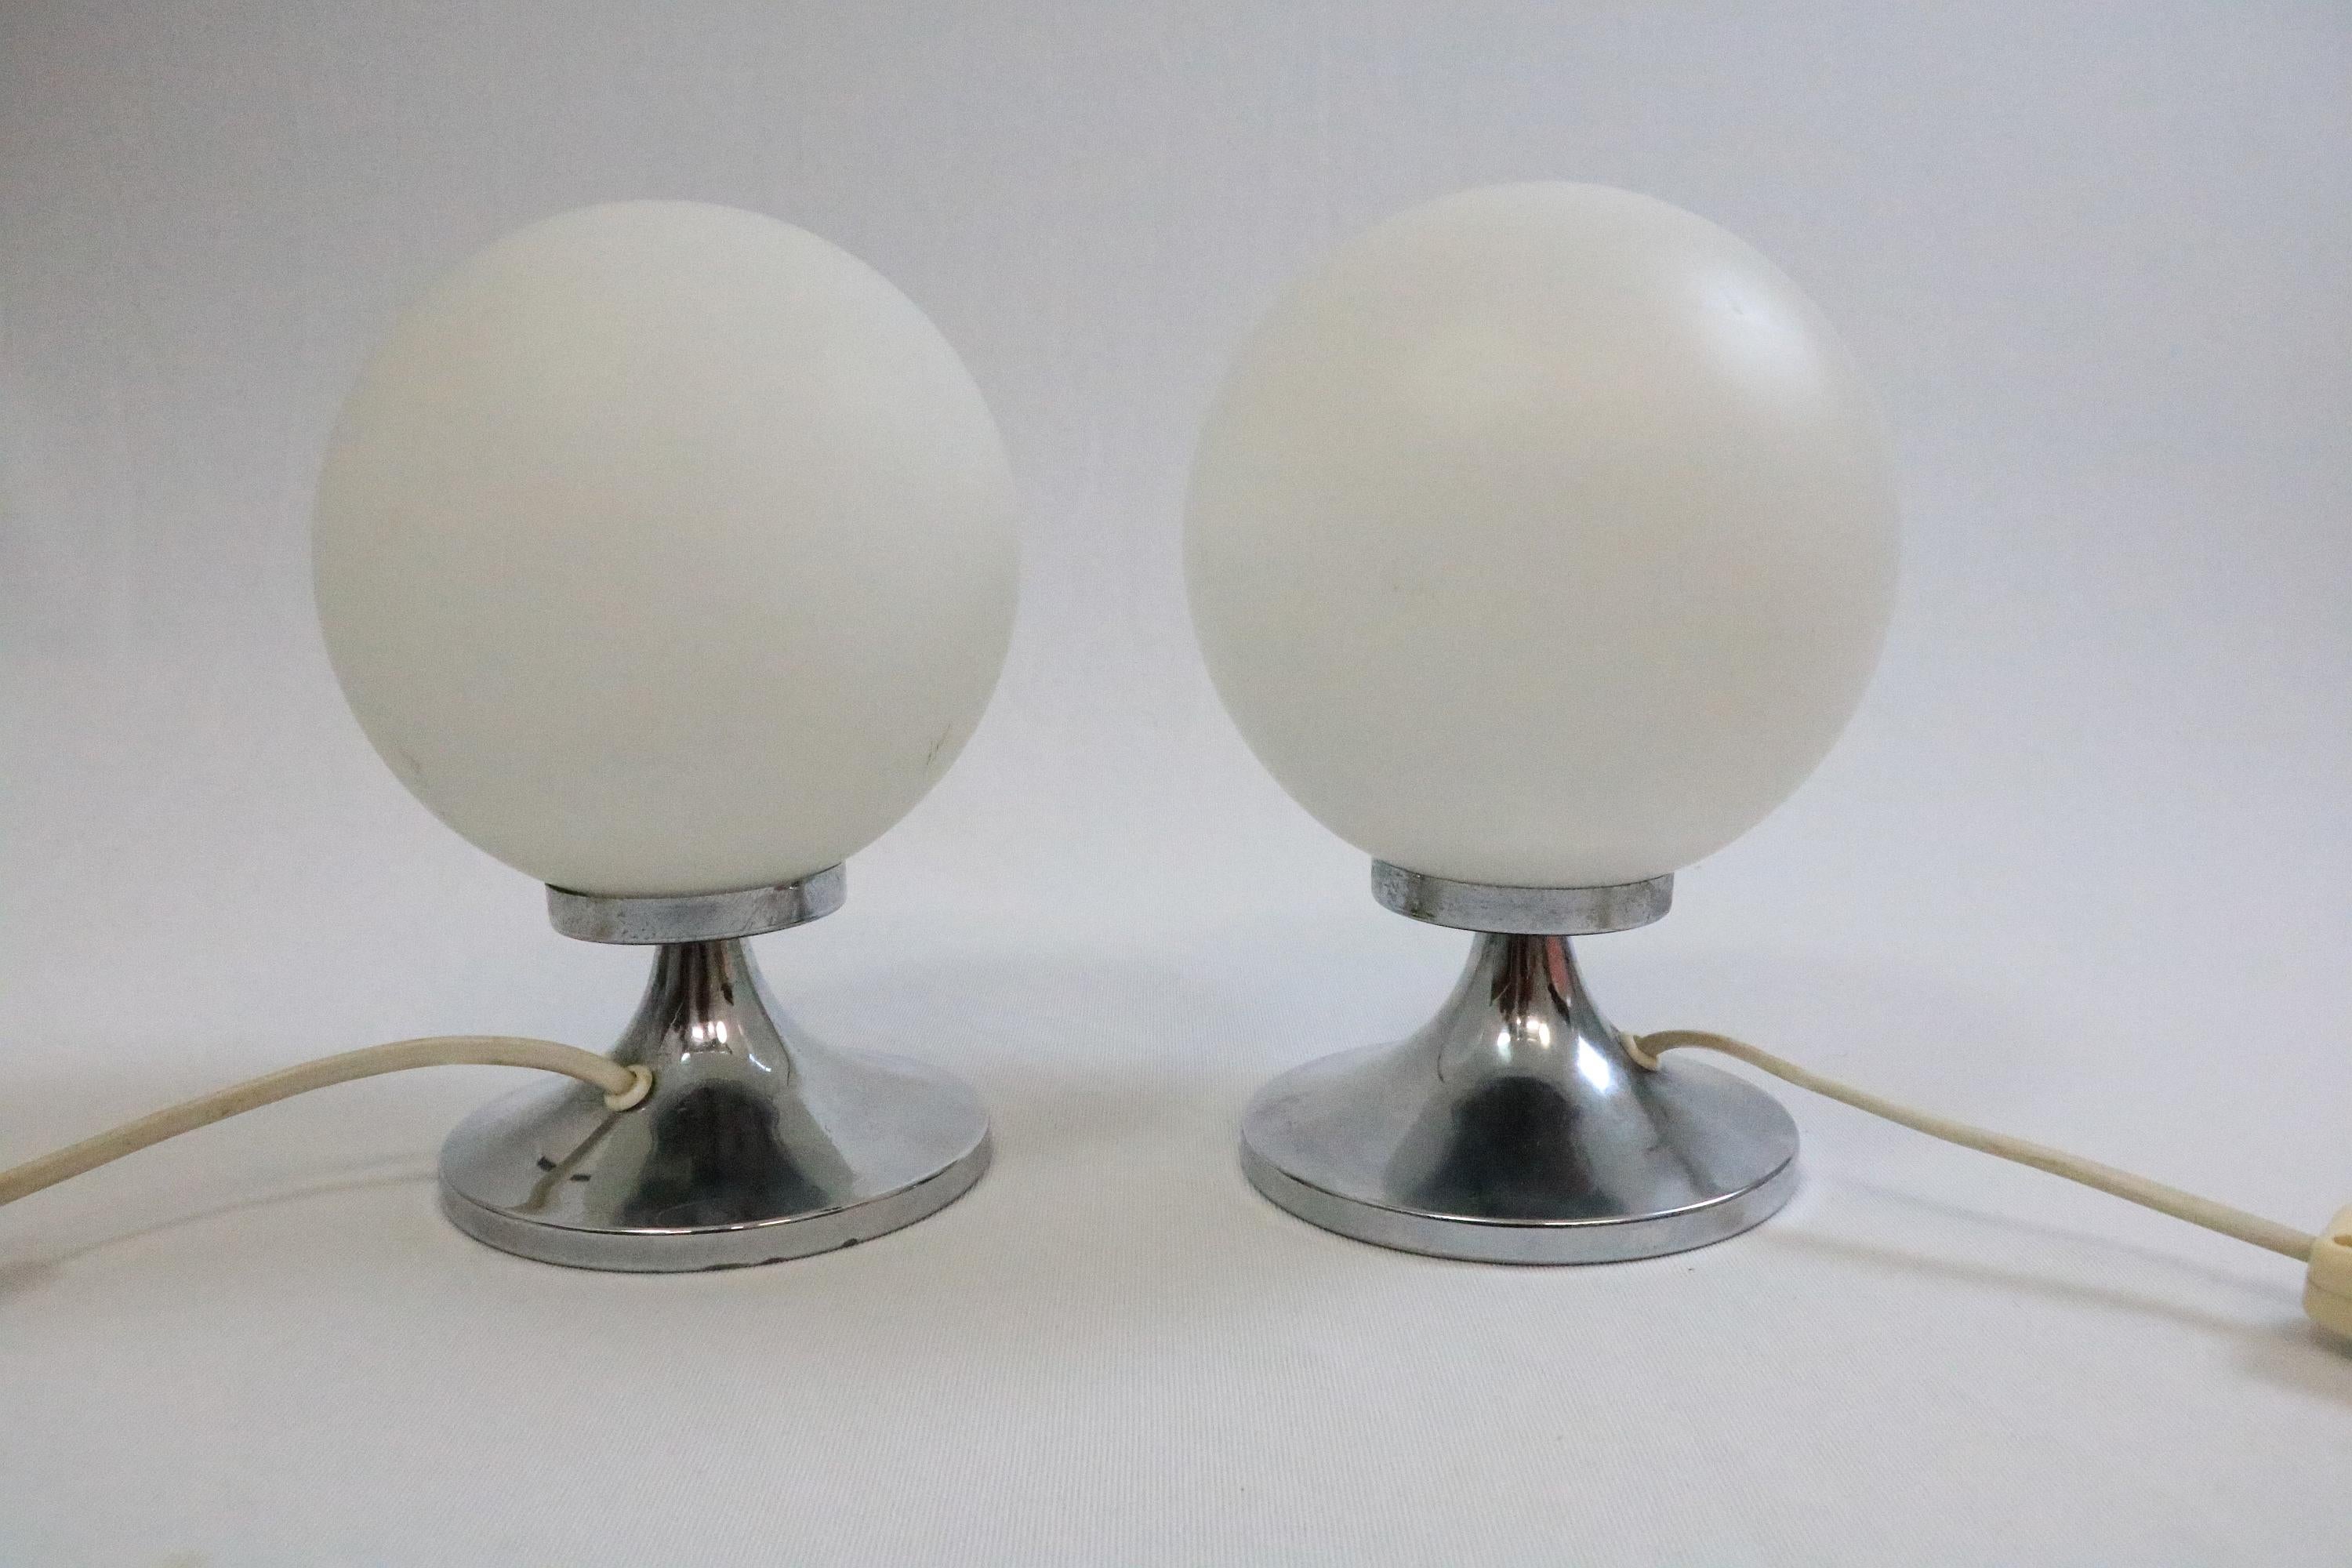 20th Century Set of 2 Small Table Lamps, Glass Ball, Tulip Base, Original 1970s